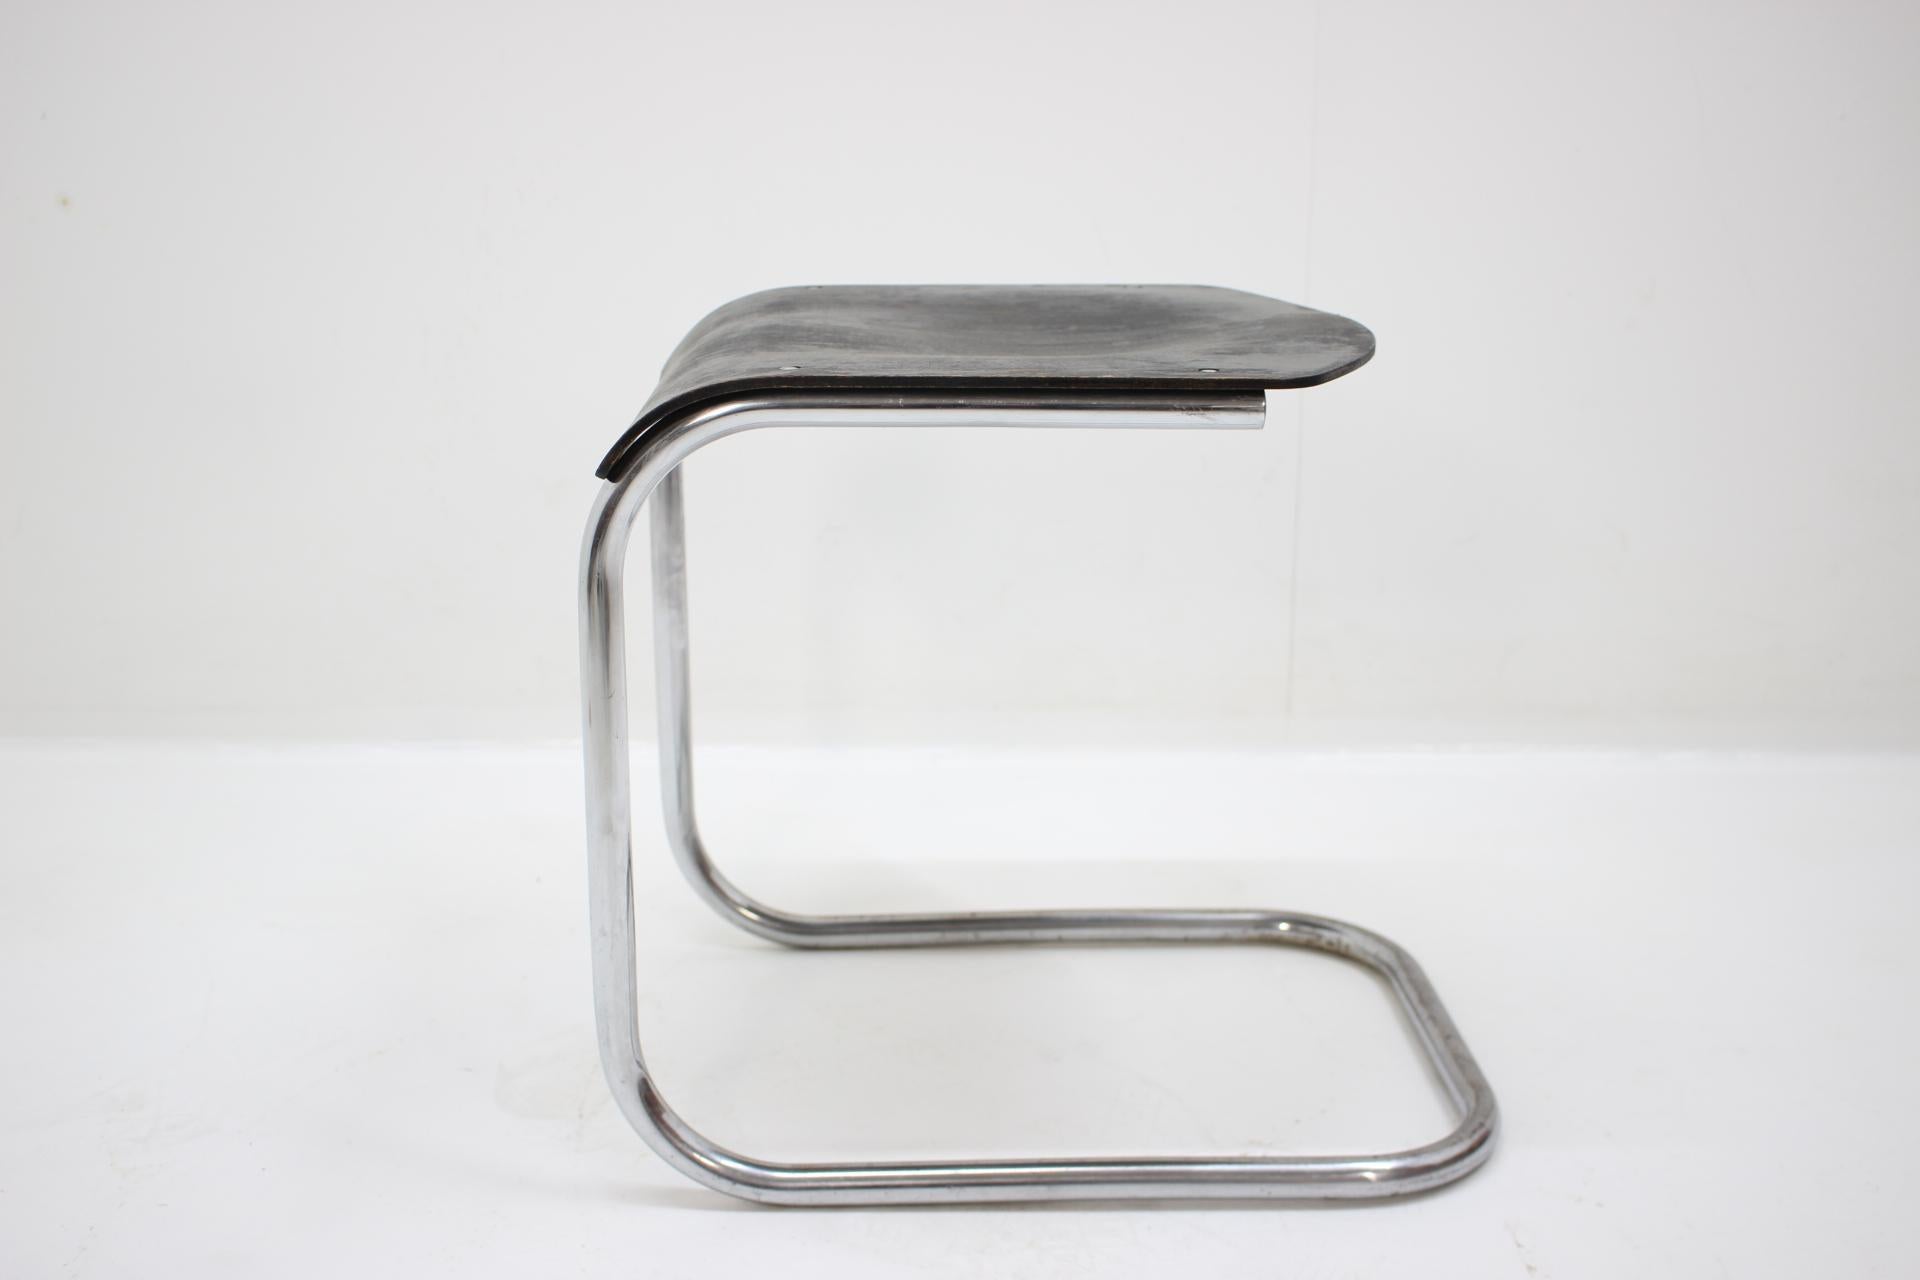 - 1930s
- Designer: Mart Stam
- Maker: Robert Slezák
- Marked by paper label
- Completely original condition
- Chrome with patina.